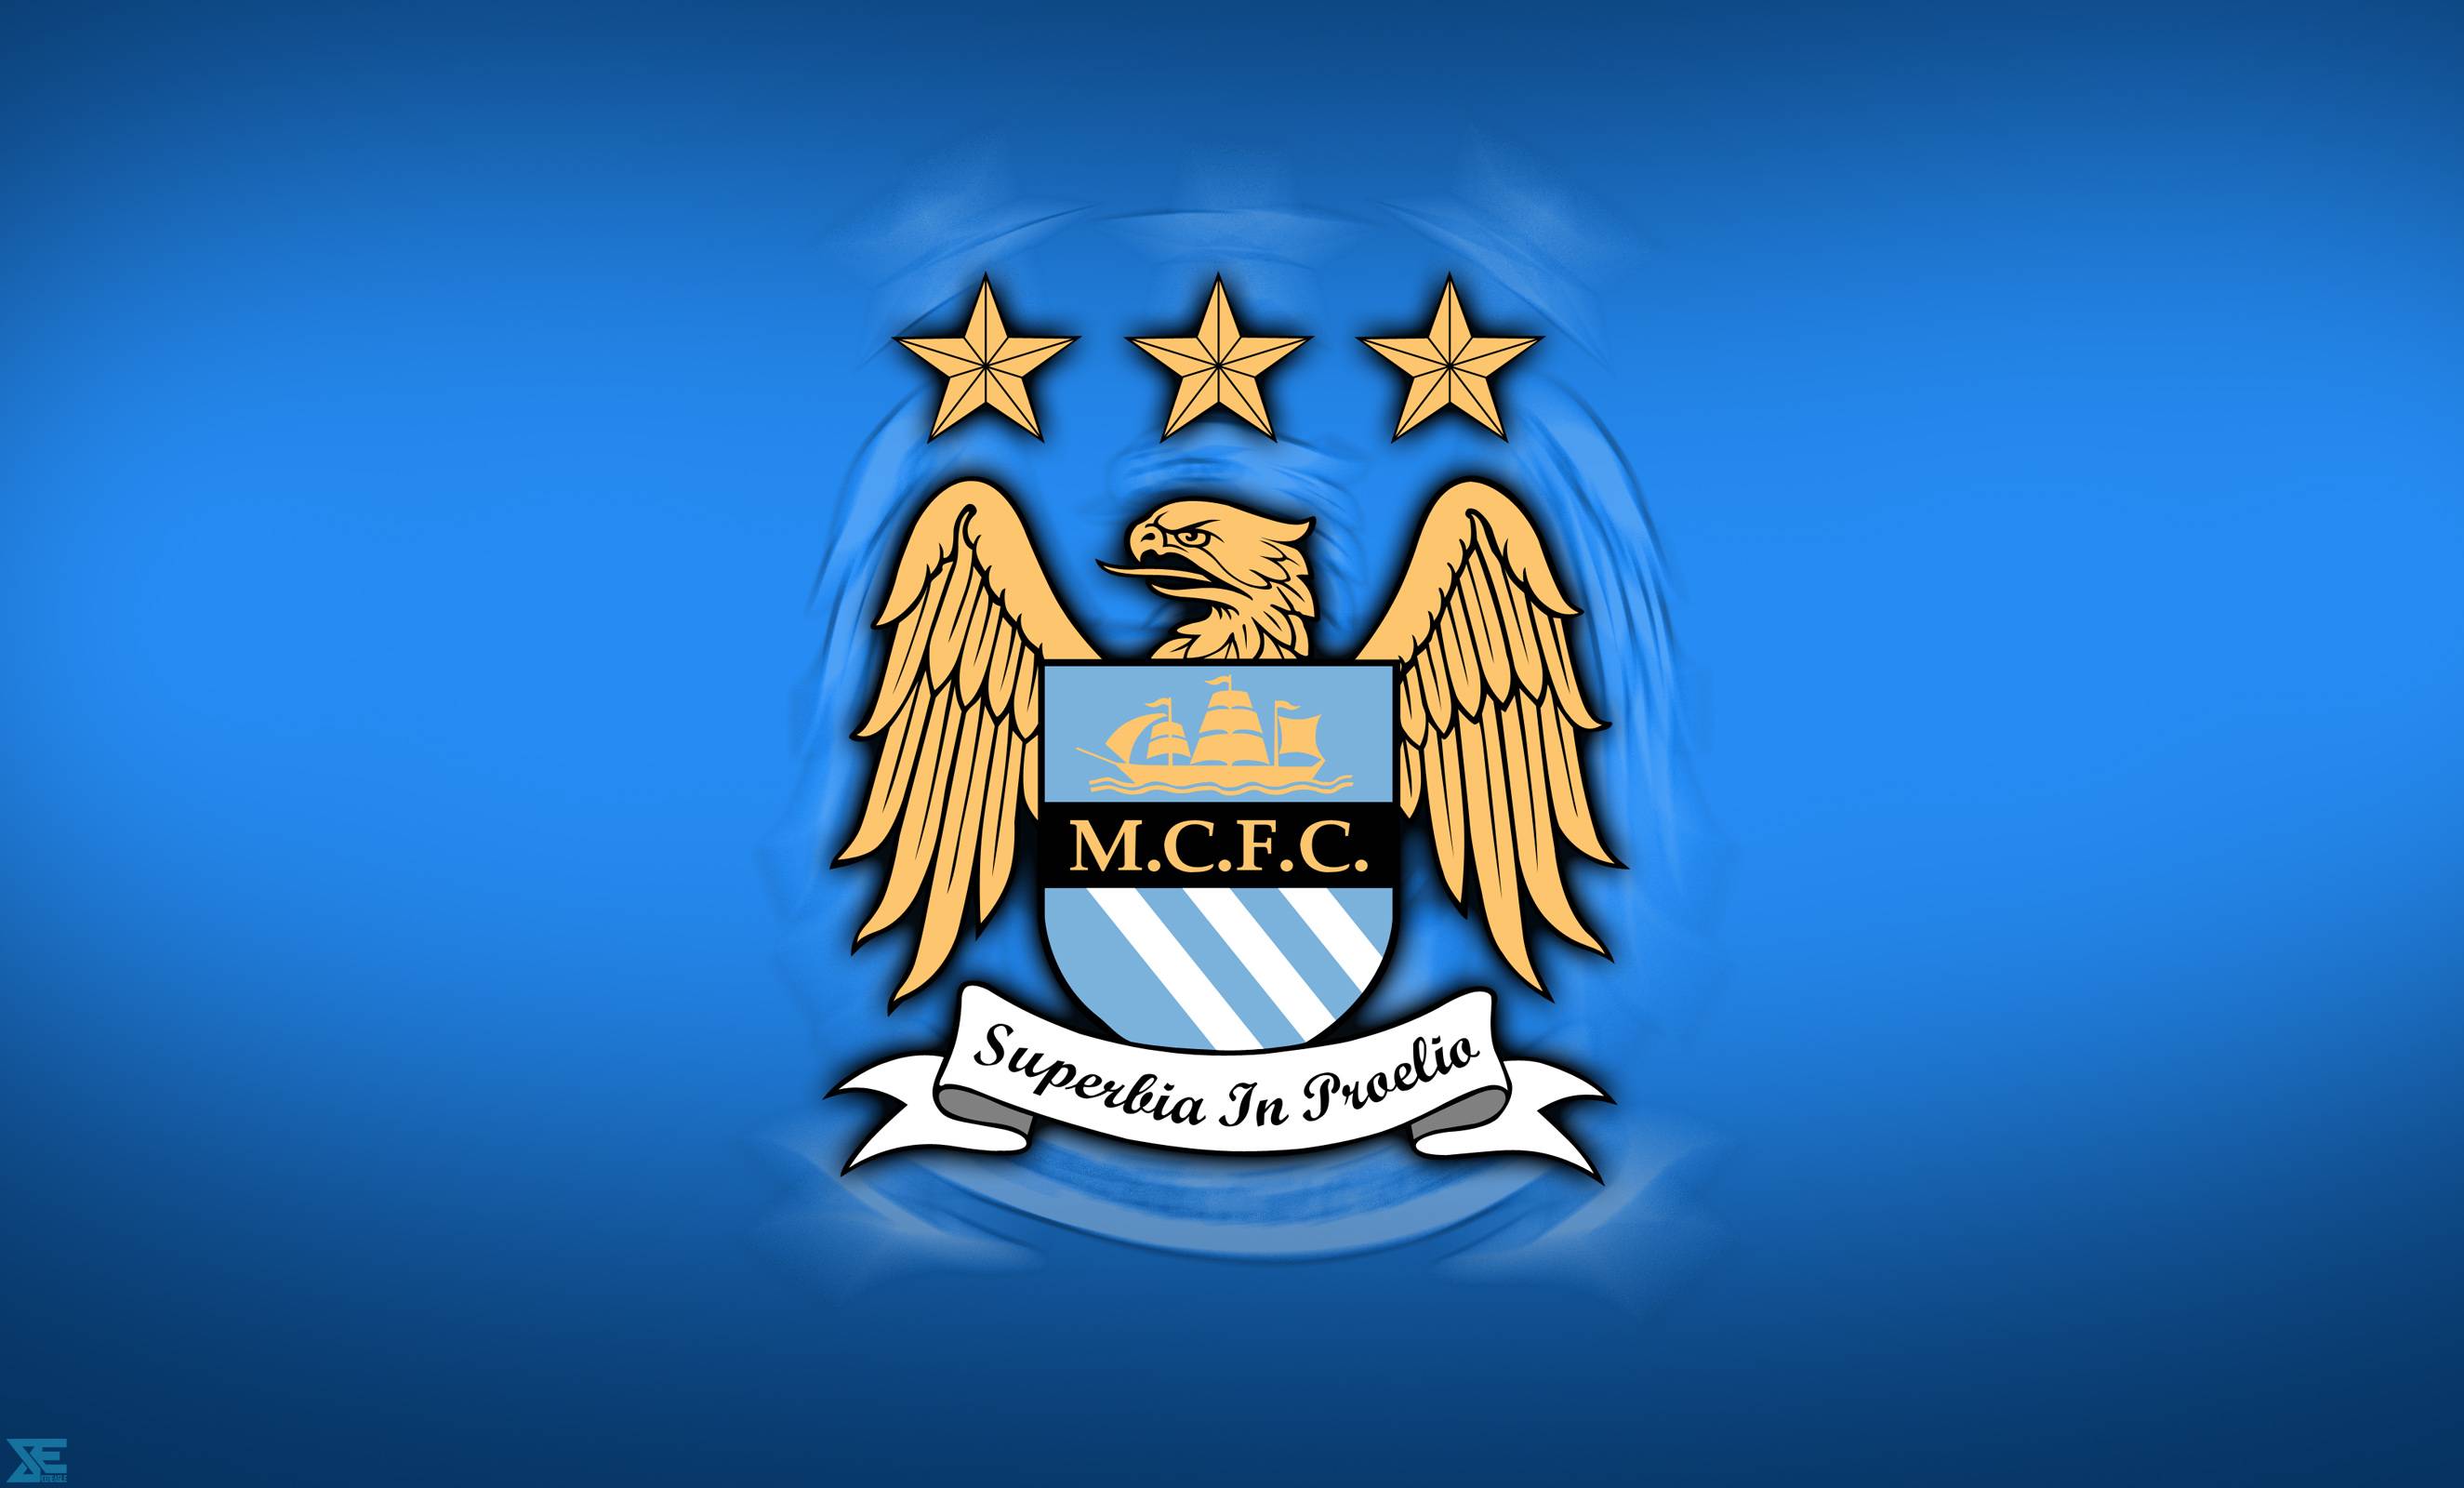 Manchester City Logo Wallpapers - Wallpaper Cave